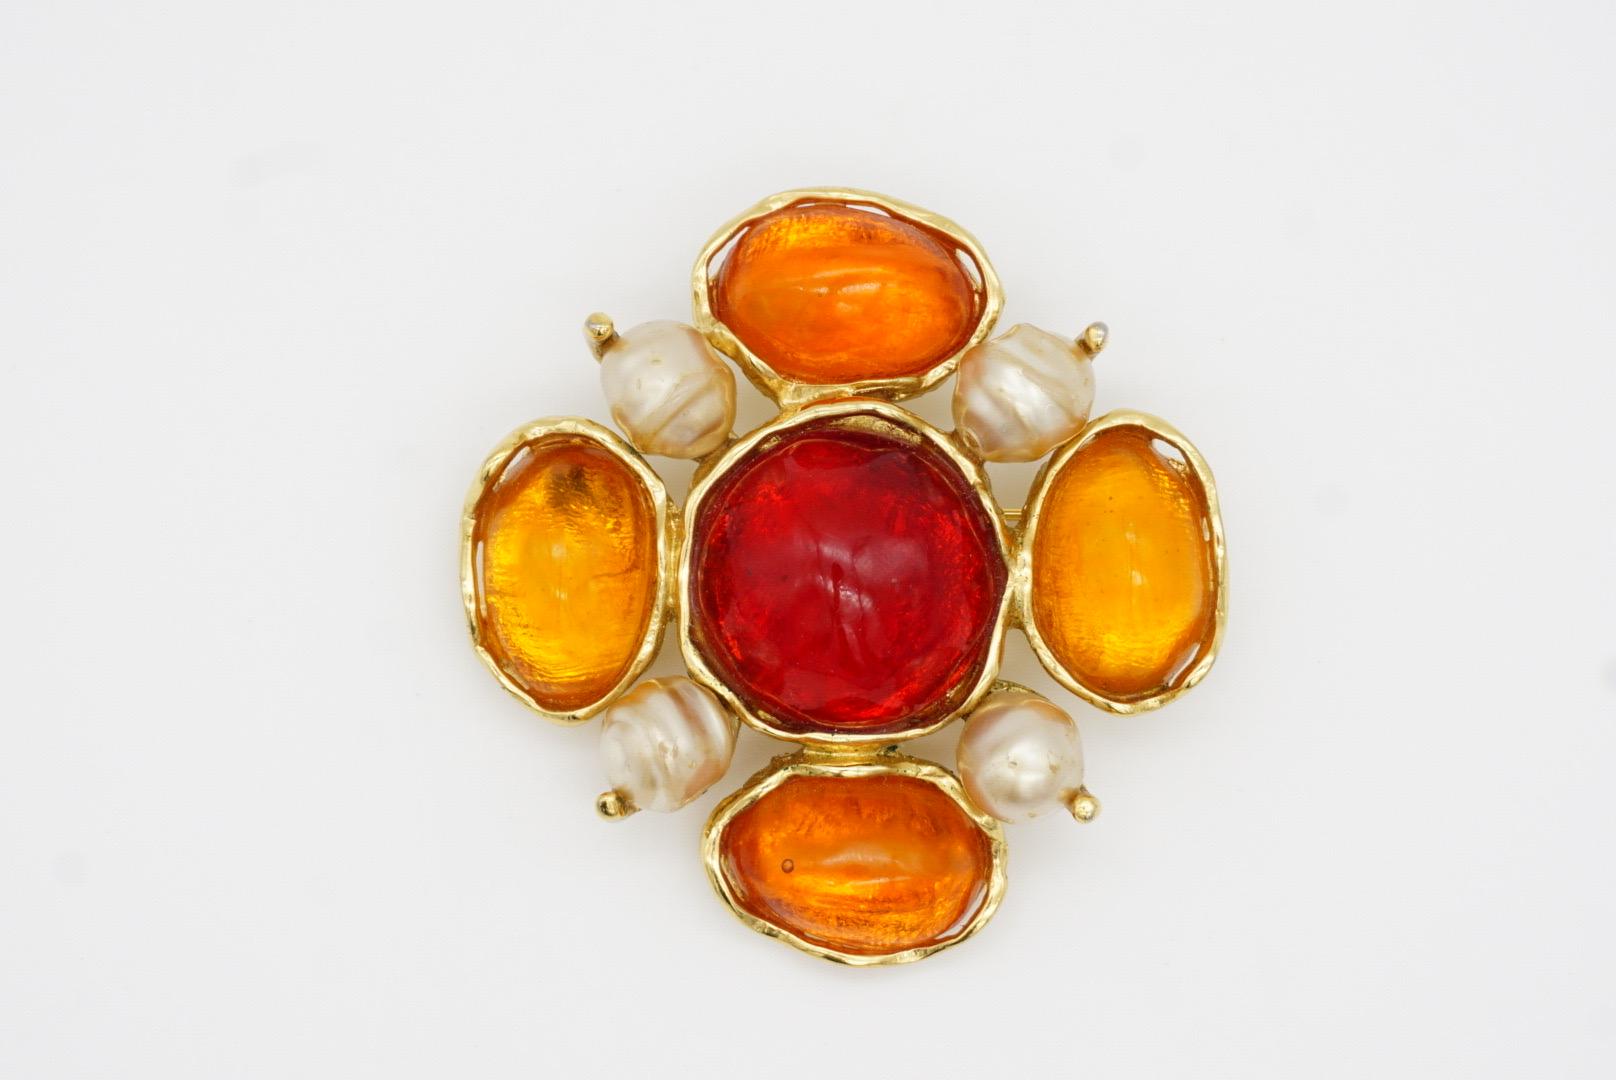 Yves Saint Laurent YSL Large Gripoix Orange Ruby Crystals Pearls Pendant Brooch For Sale 4